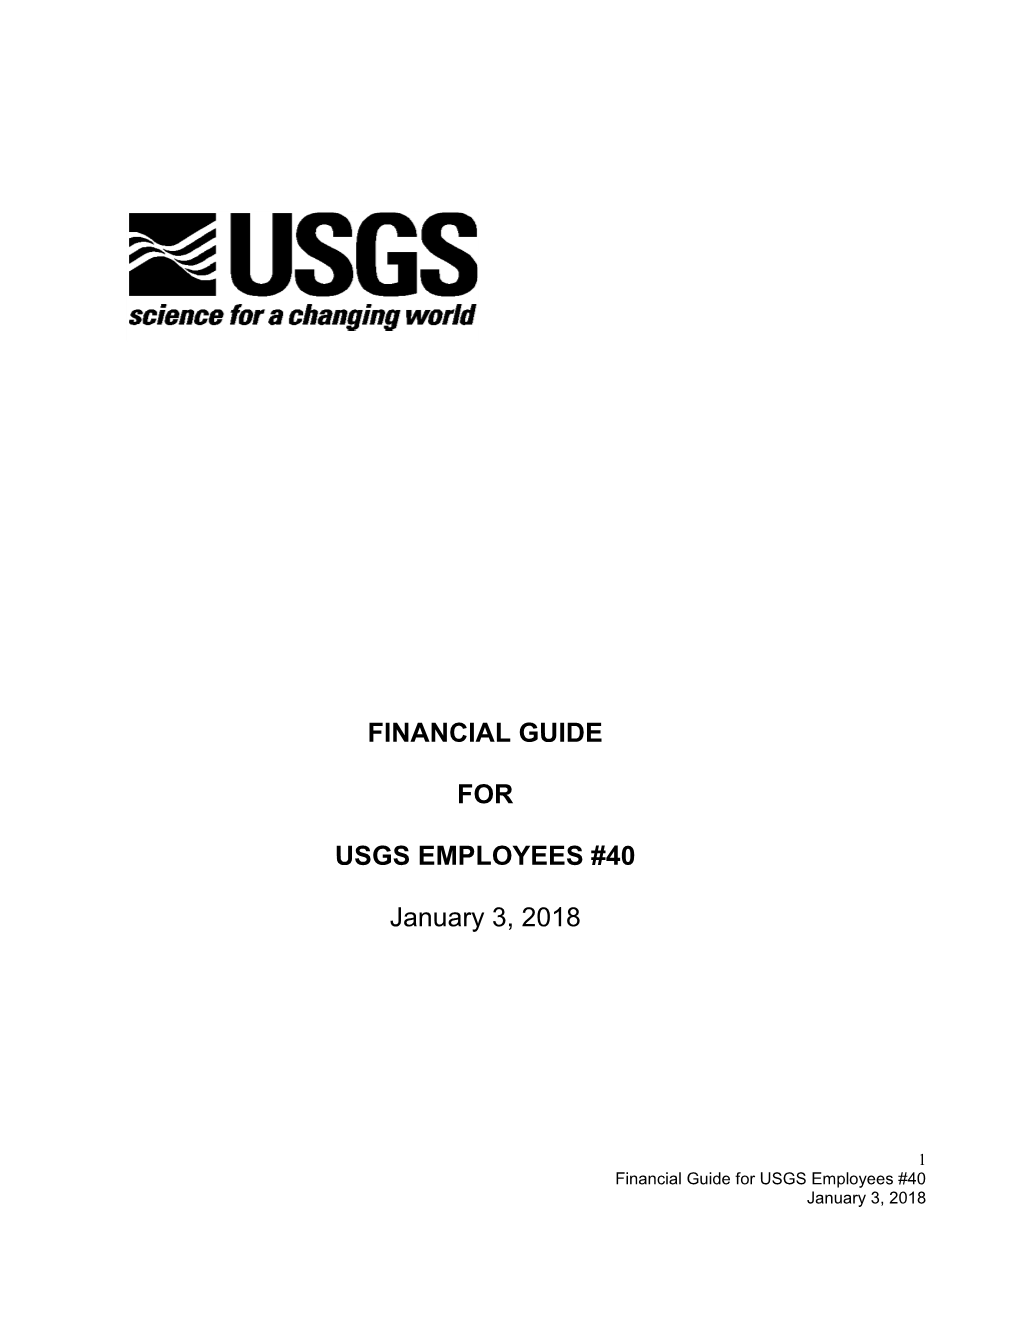 Financial Guide for USGS Employees #40